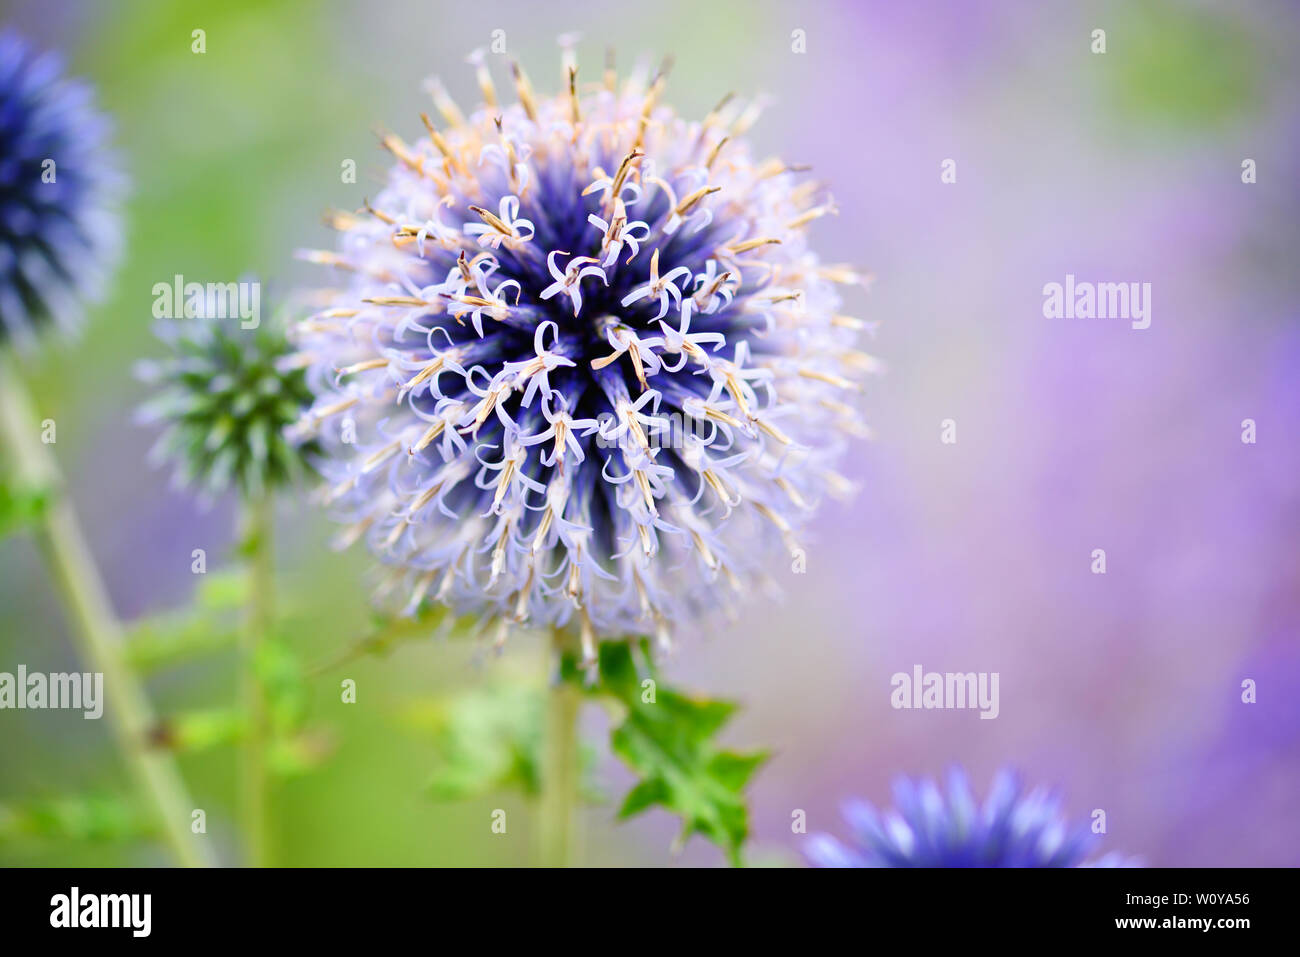 Globe thistle a flower (Echinops) in the garden. Flower family of Asteraceae. Stock Photo